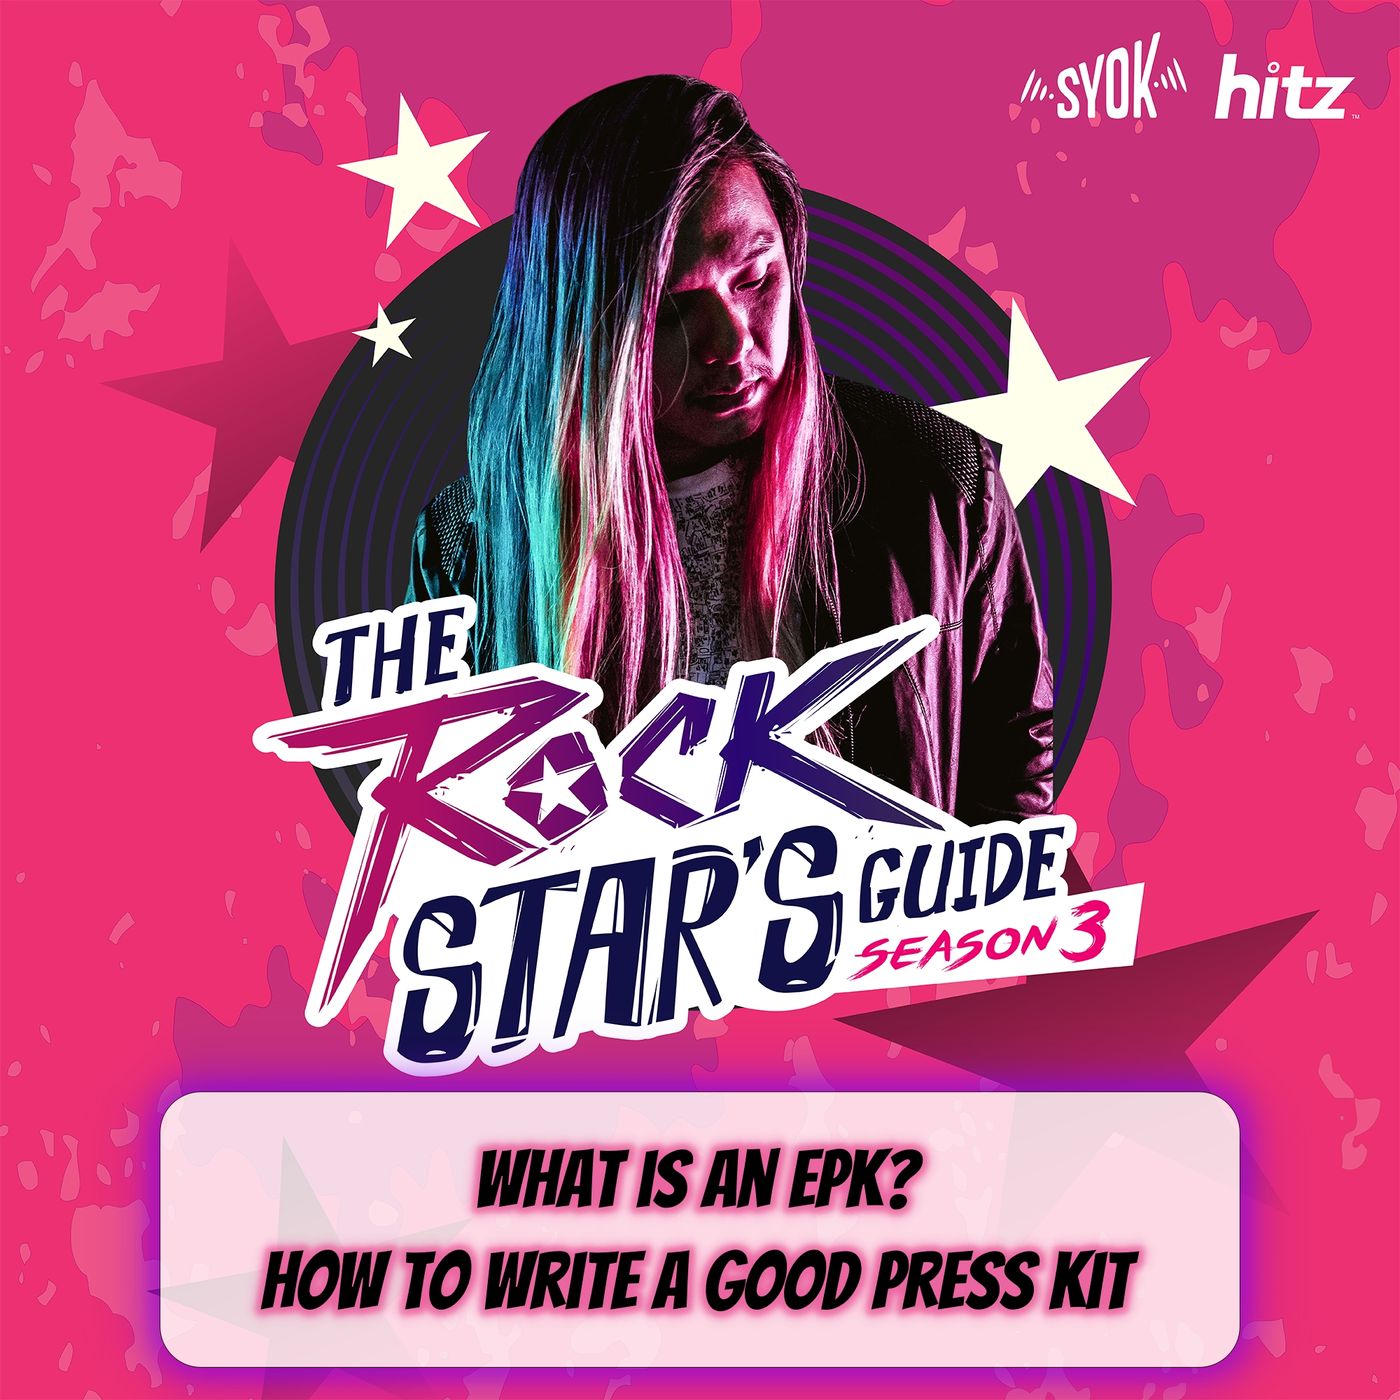 What Is An EPK? How To Write A Good Press Kit | The Rockstar's Guide S3E5